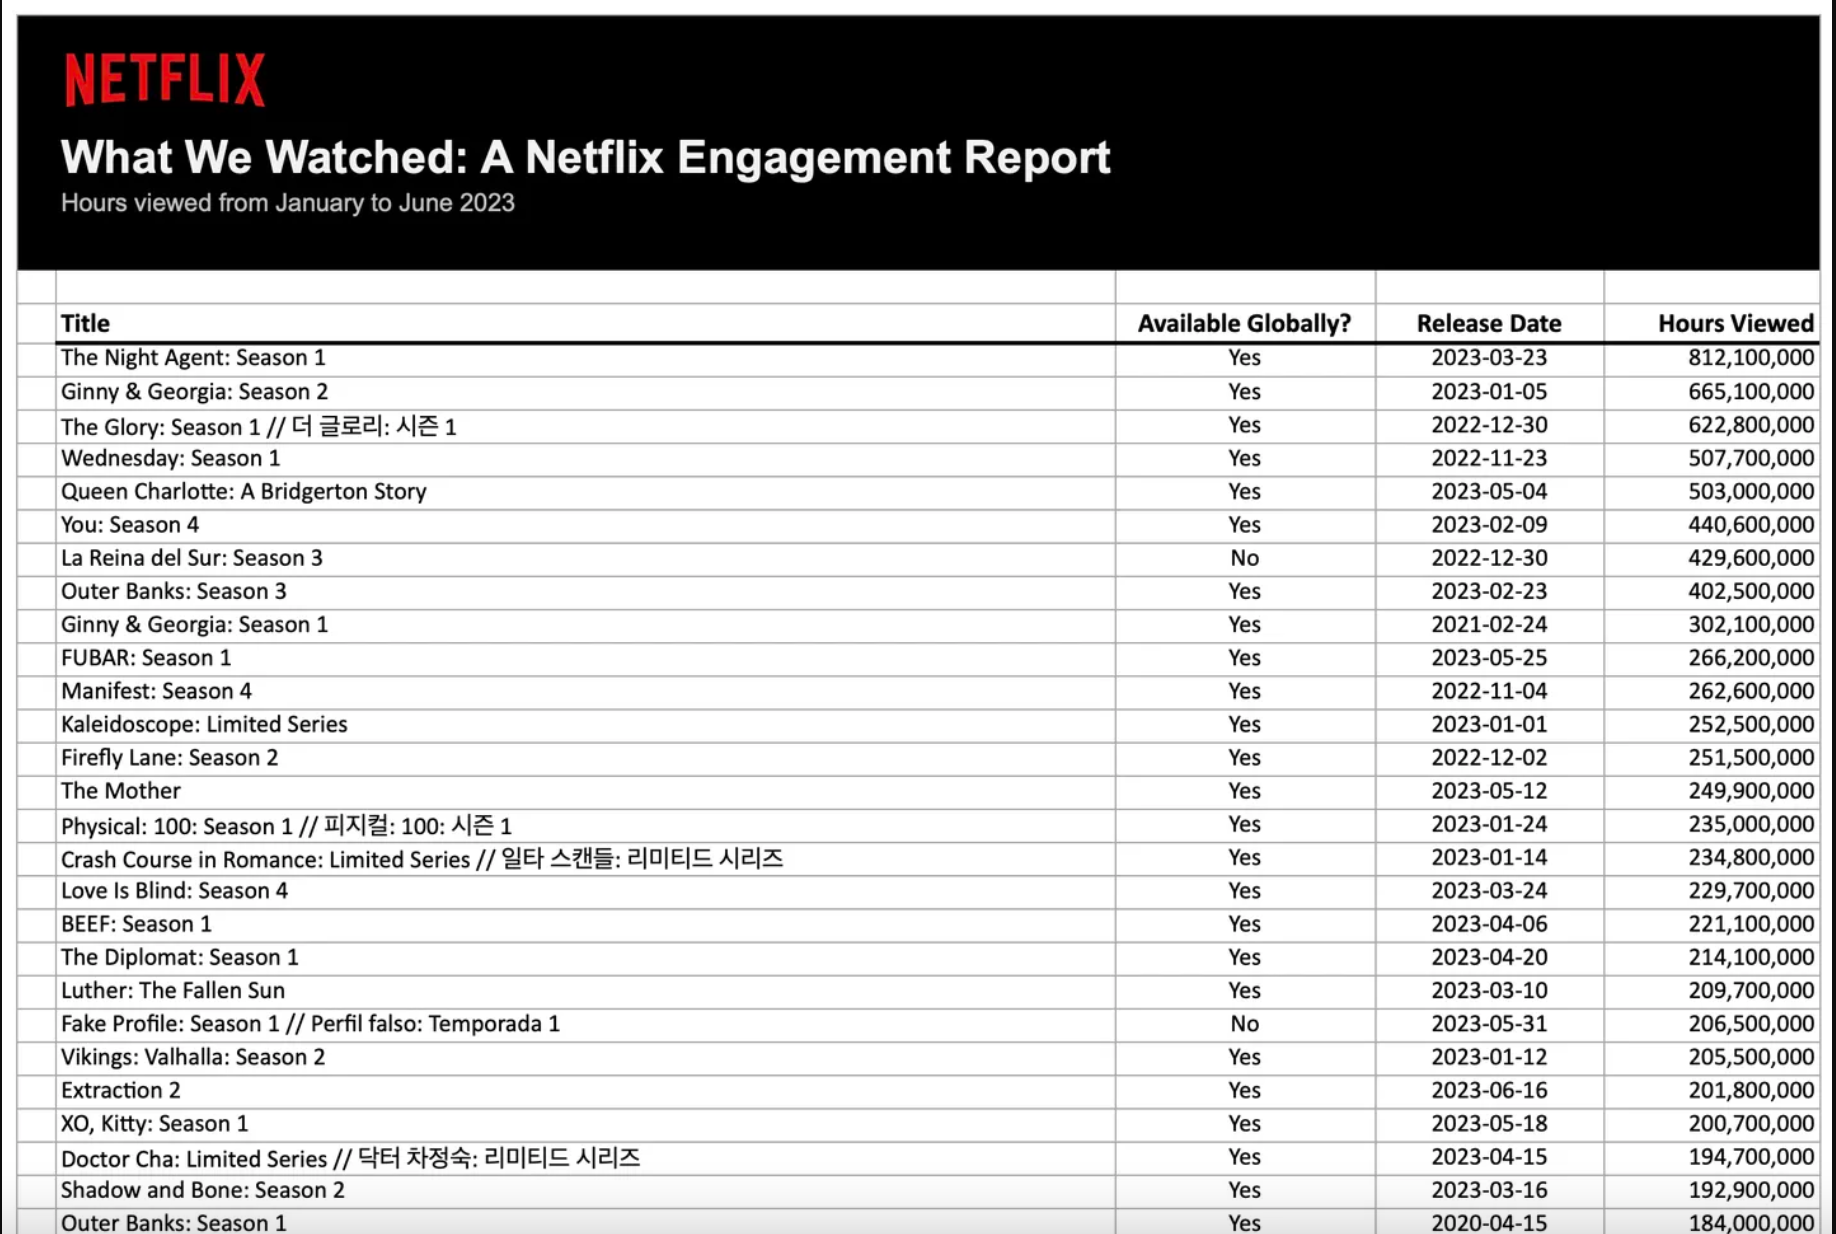 Netflix’s most-watched league table, which is going to be published twice a year